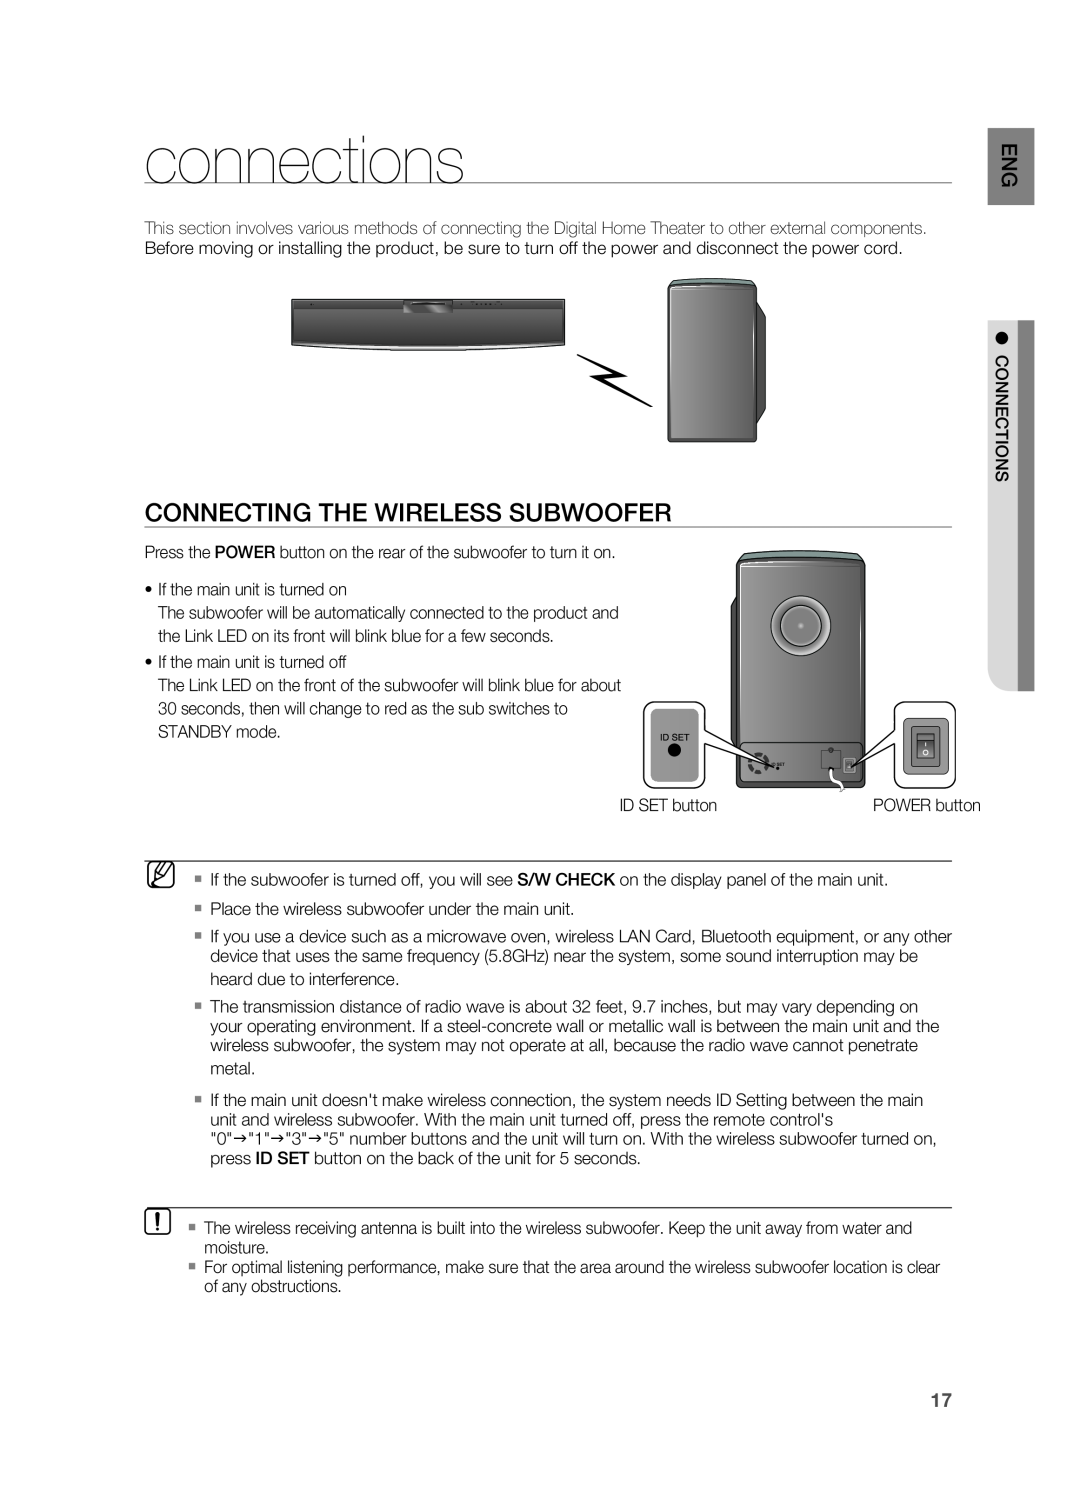 Samsung HT-X810 user manual connections, CONNECTING THE WIrElESS SUBWOOFEr 